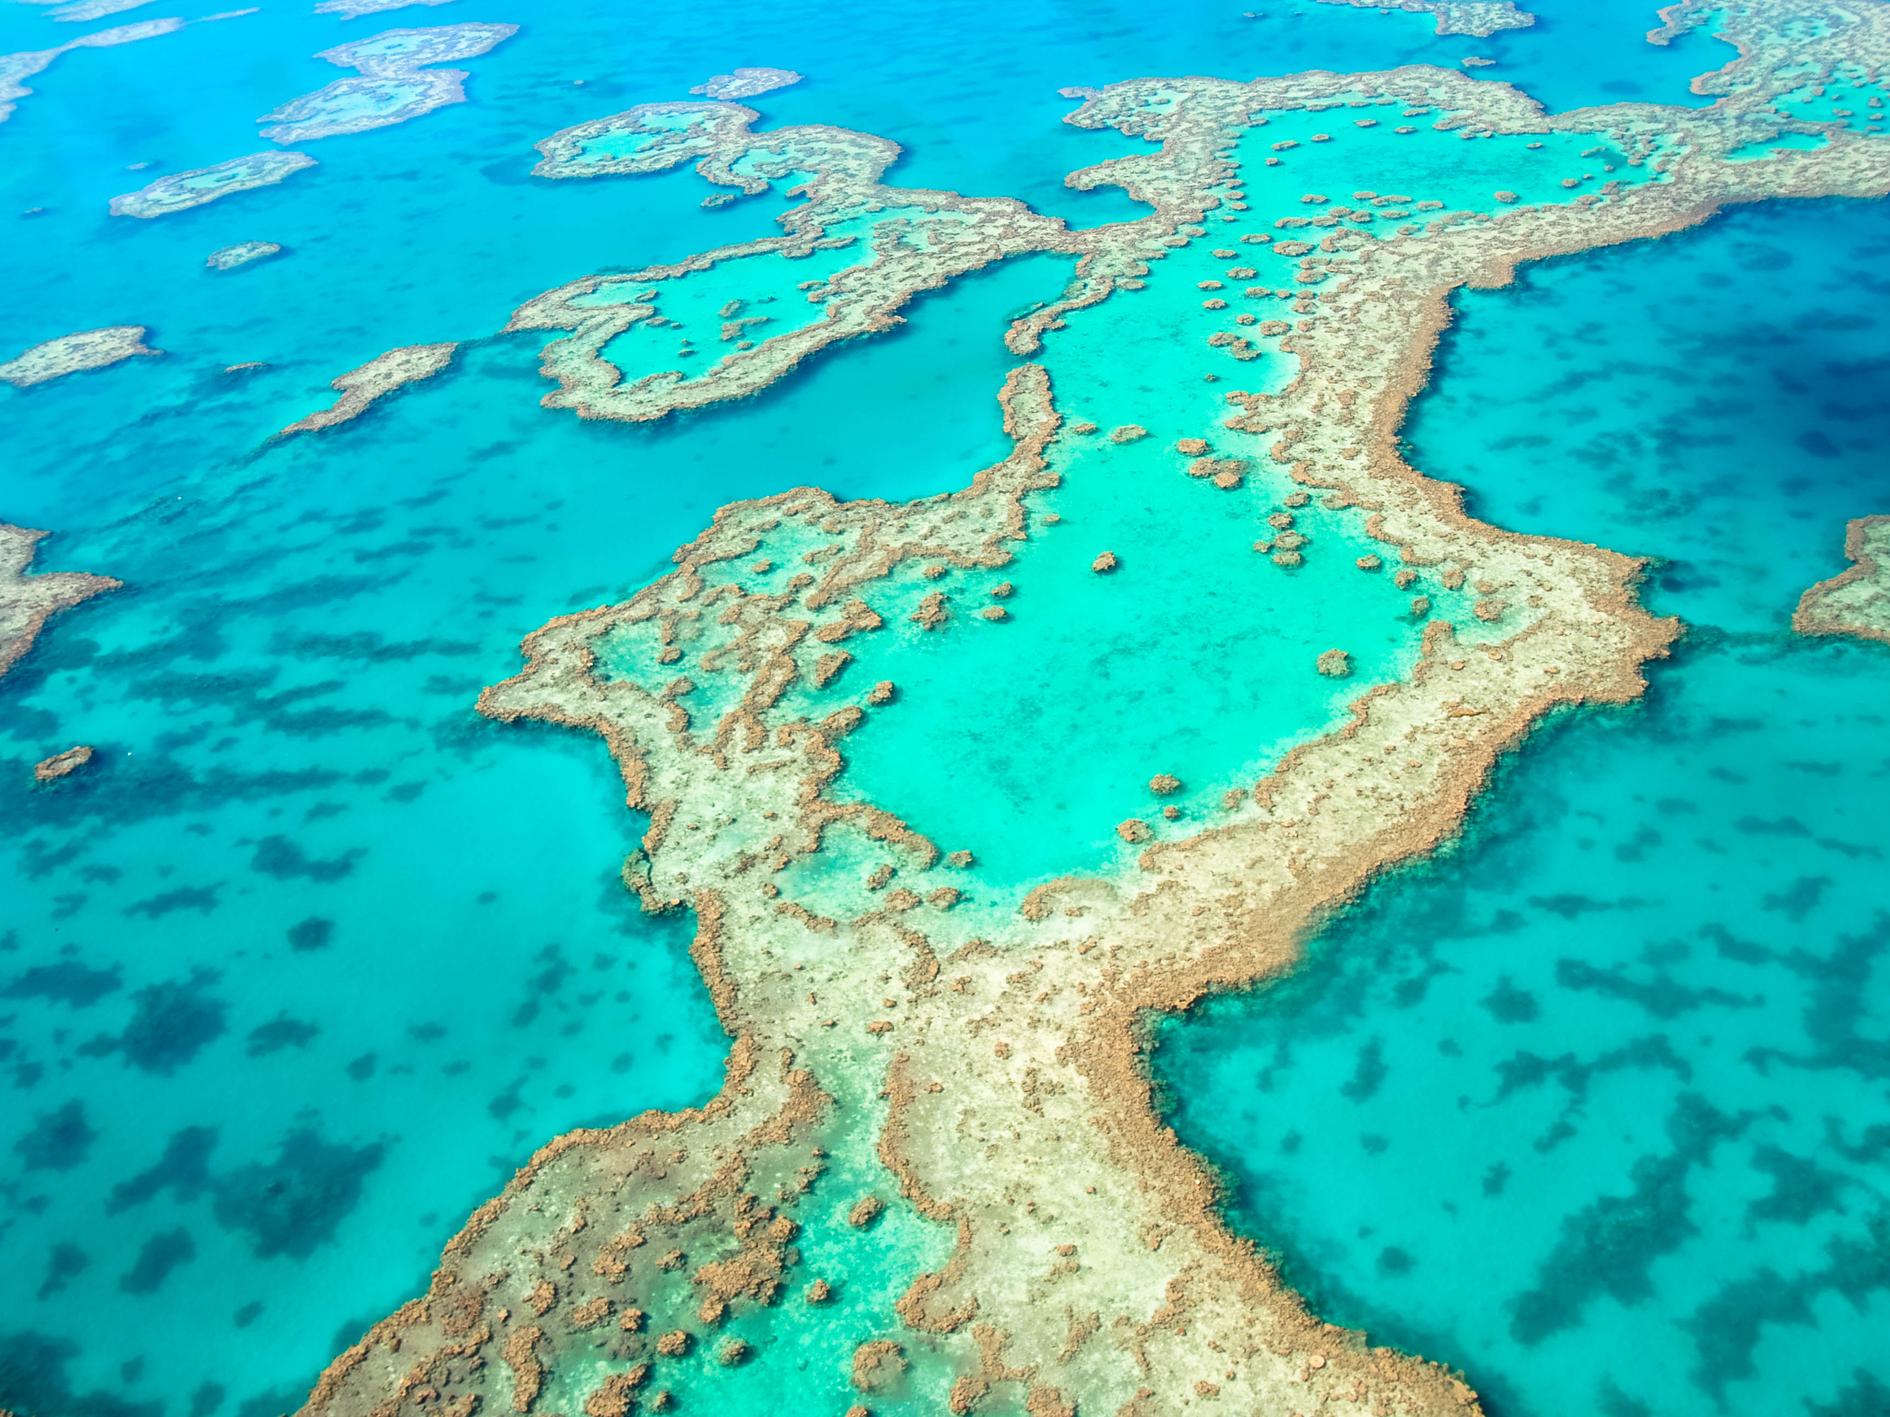 The Great Barrier Reef is one of the seven wonders of the natural world